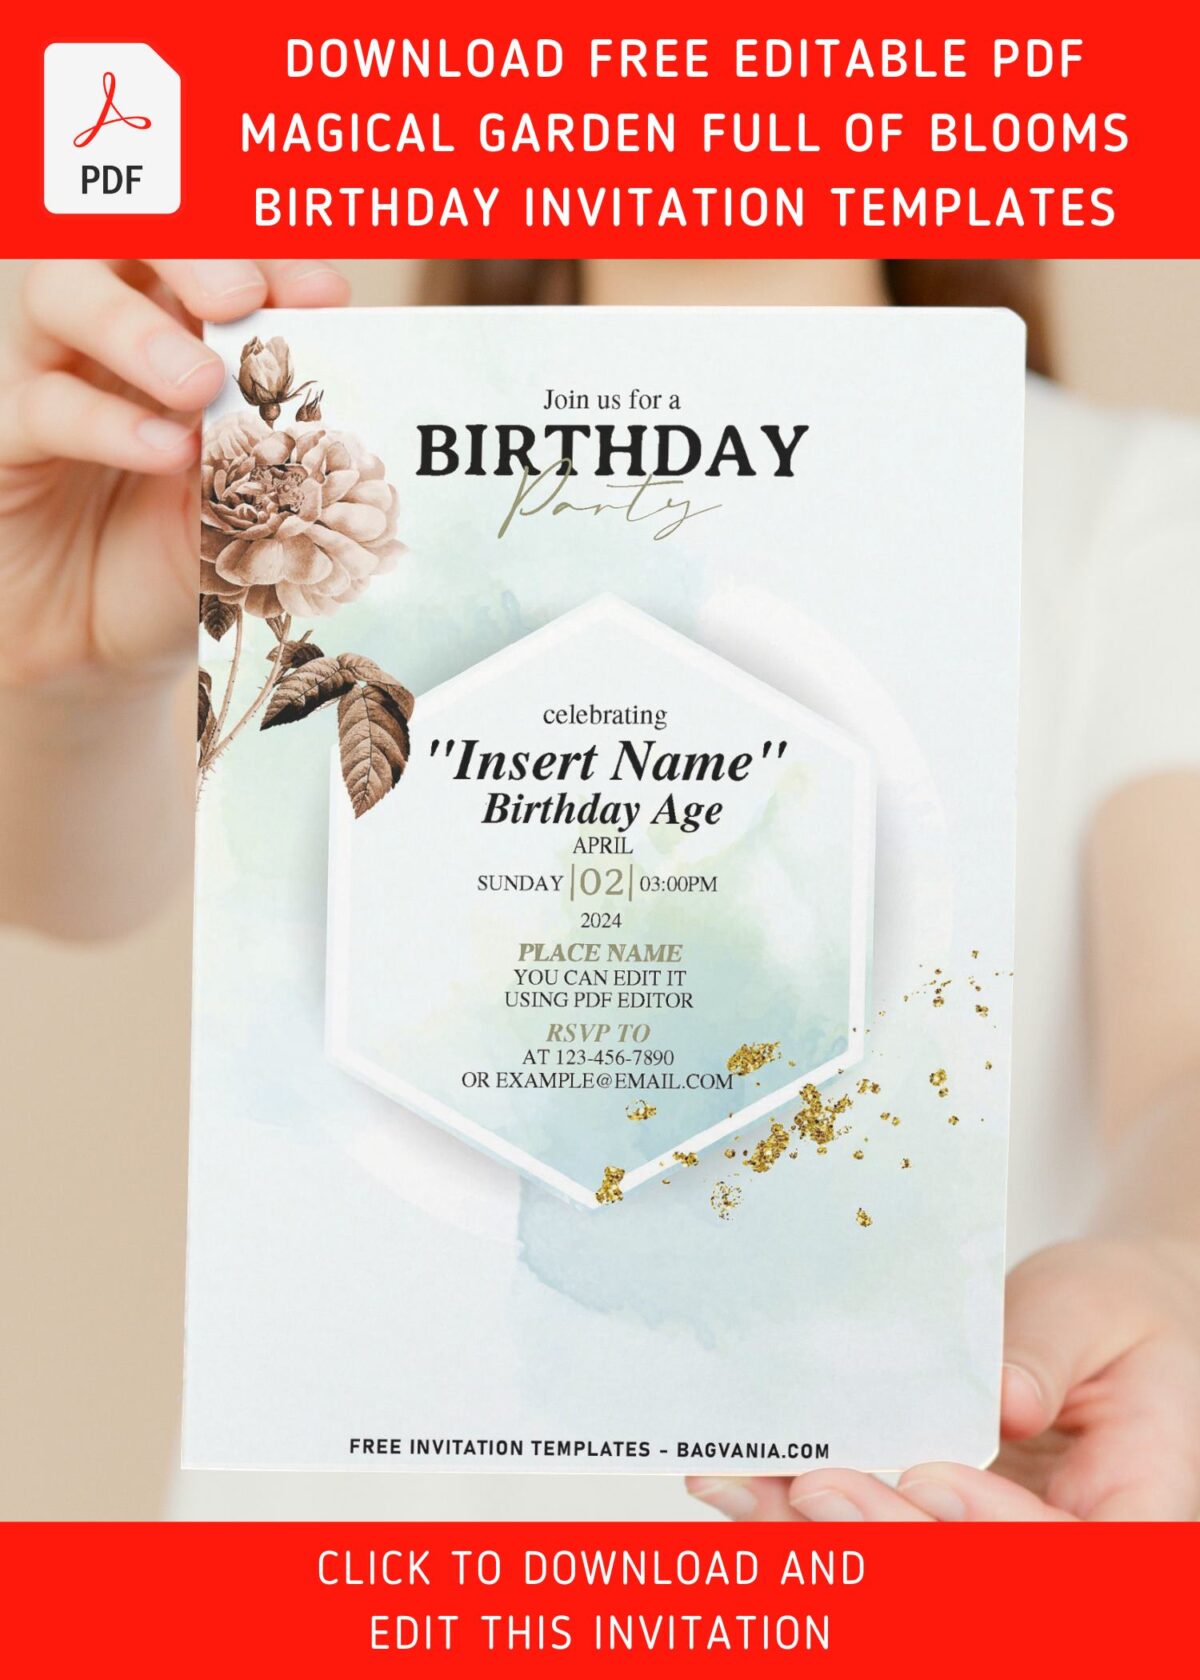 (Free Editable PDF) Magical Garden Full Of Blooms Birthday Invitation Templates with rustic peony